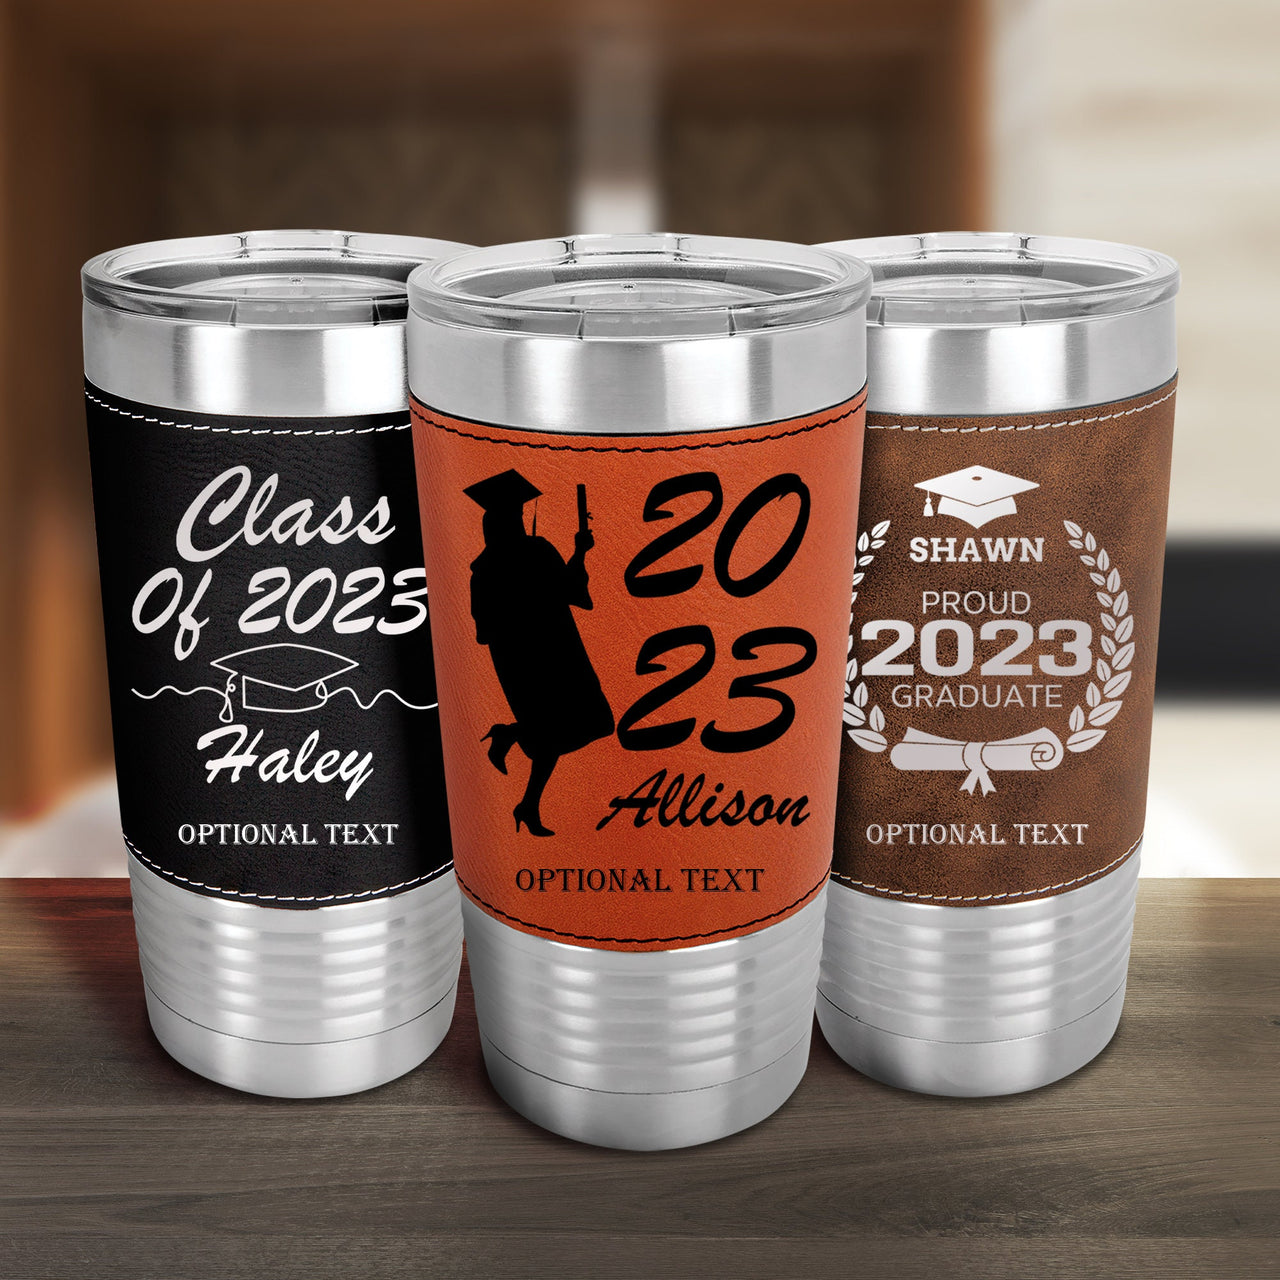 Graduation 2023, Leatherette Tumbler Graduation Gifts, College Grad Gift for Her, Personalized Leather Tumbler Class of 2023 Daughter Gift